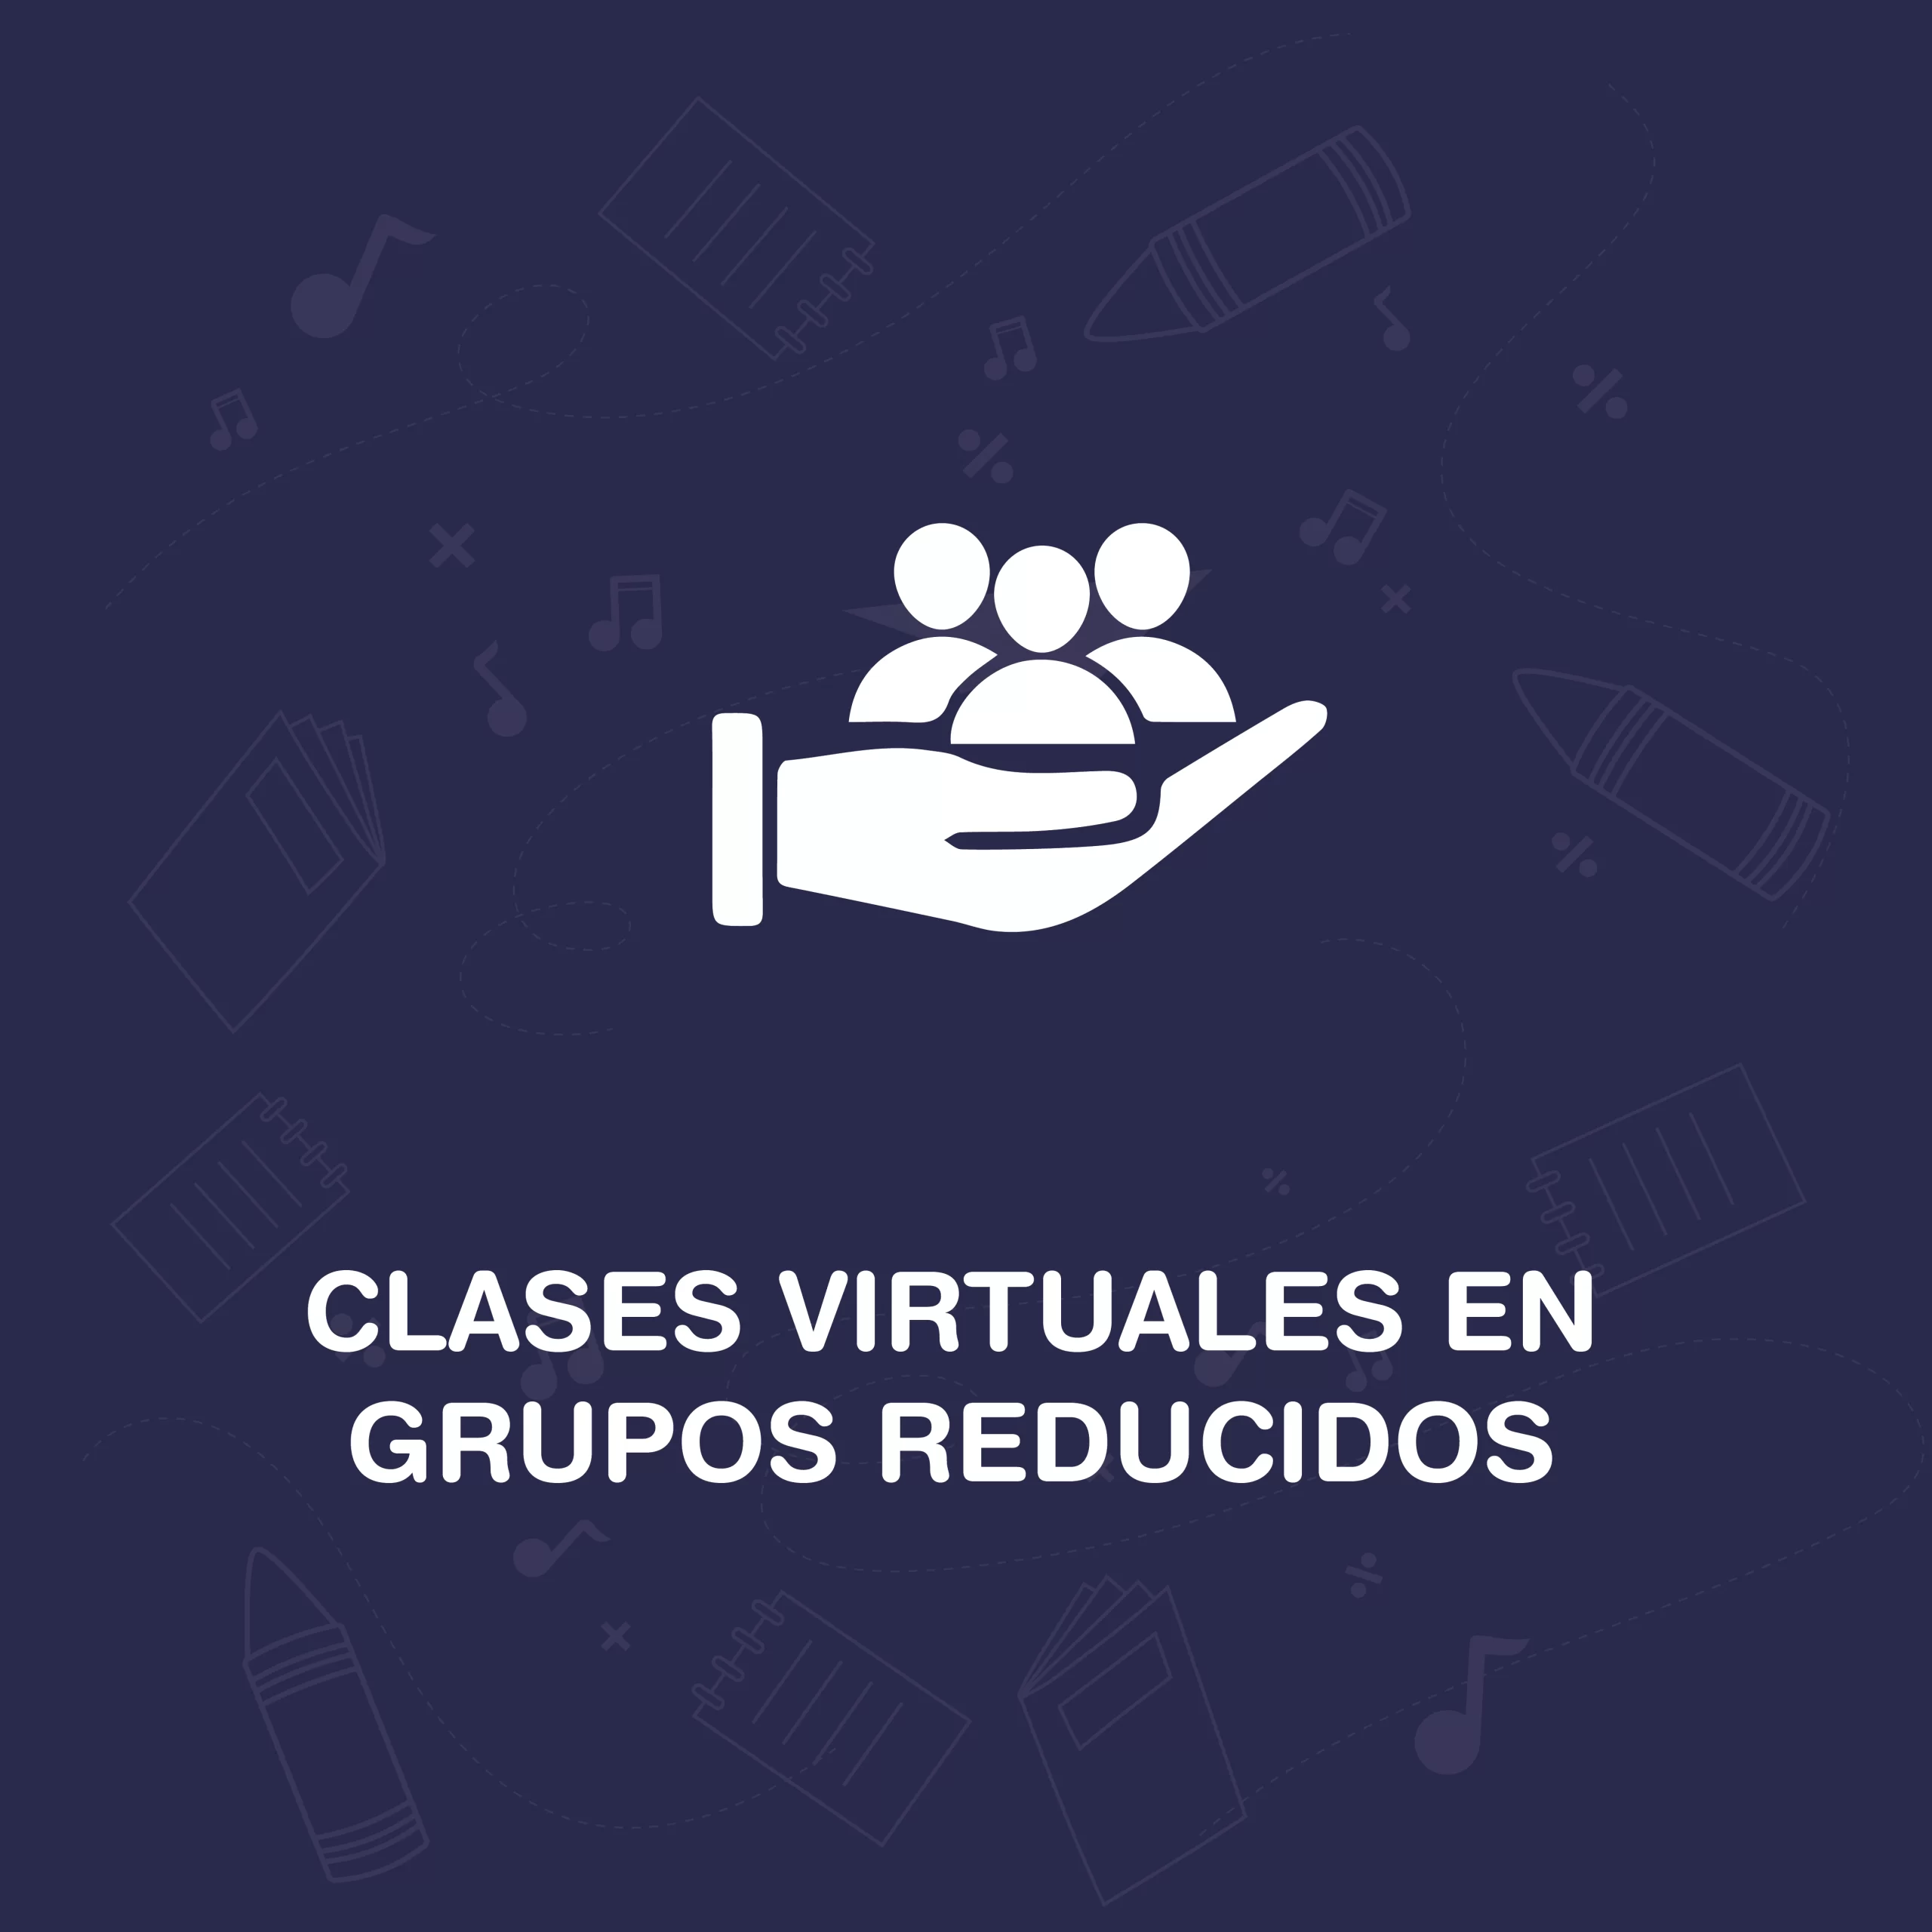 Clases Virtuales